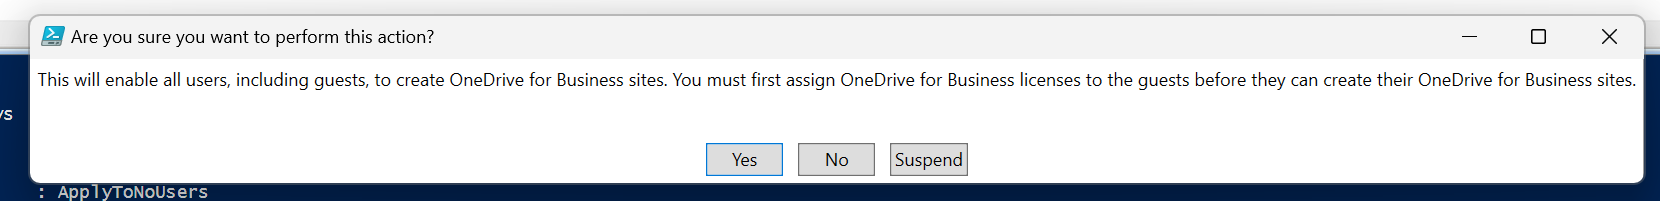 Warning Message Enabling Guests to OneDrive